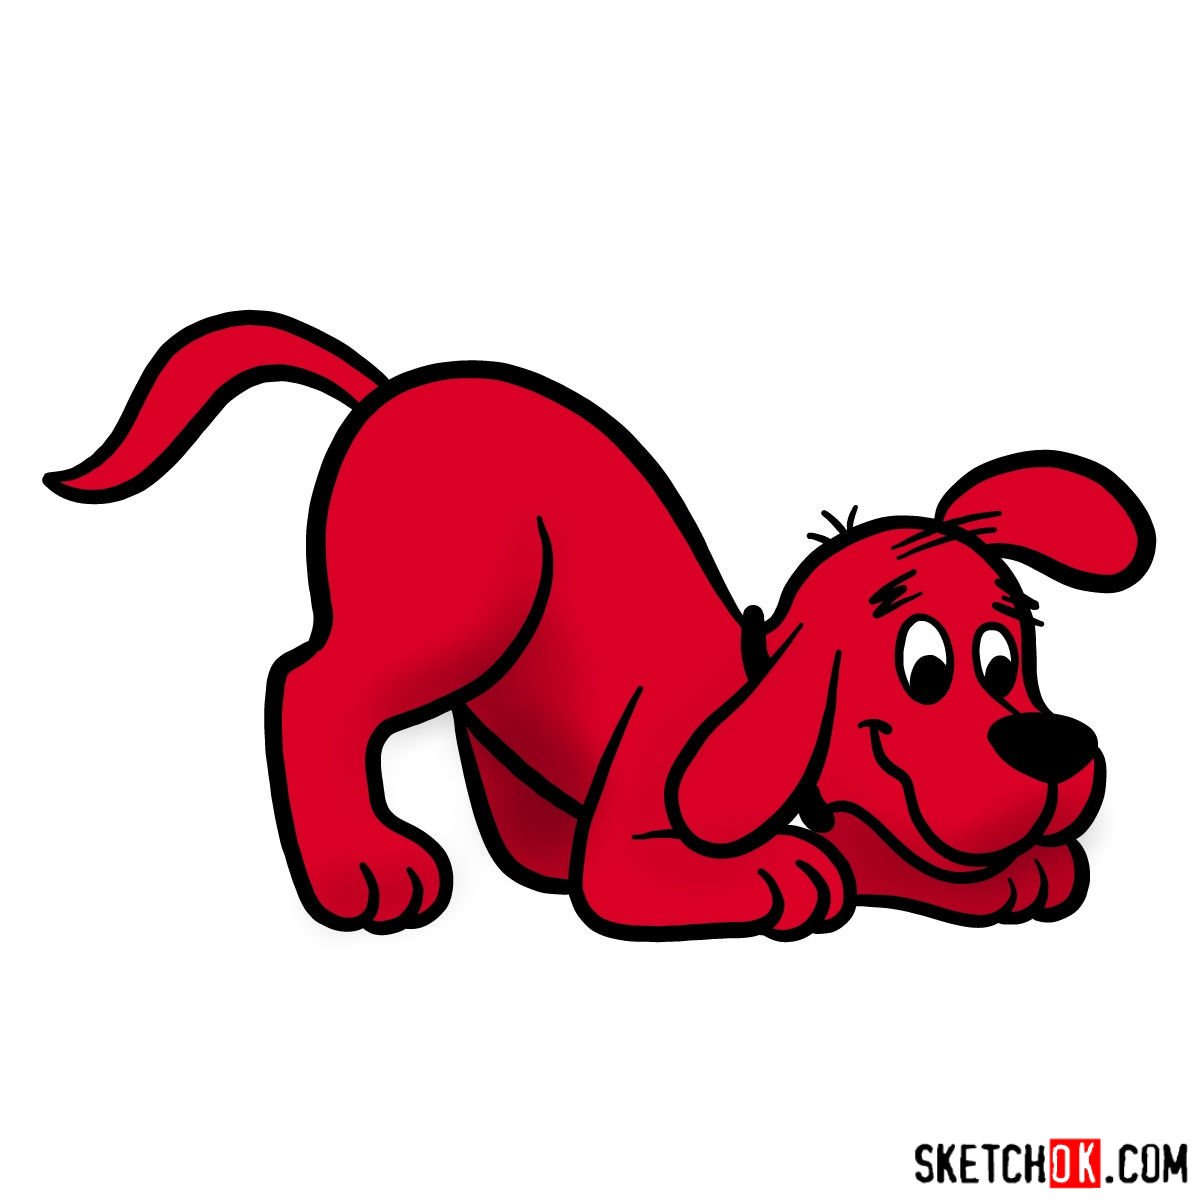 How to draw Clifford the Big Red Dog